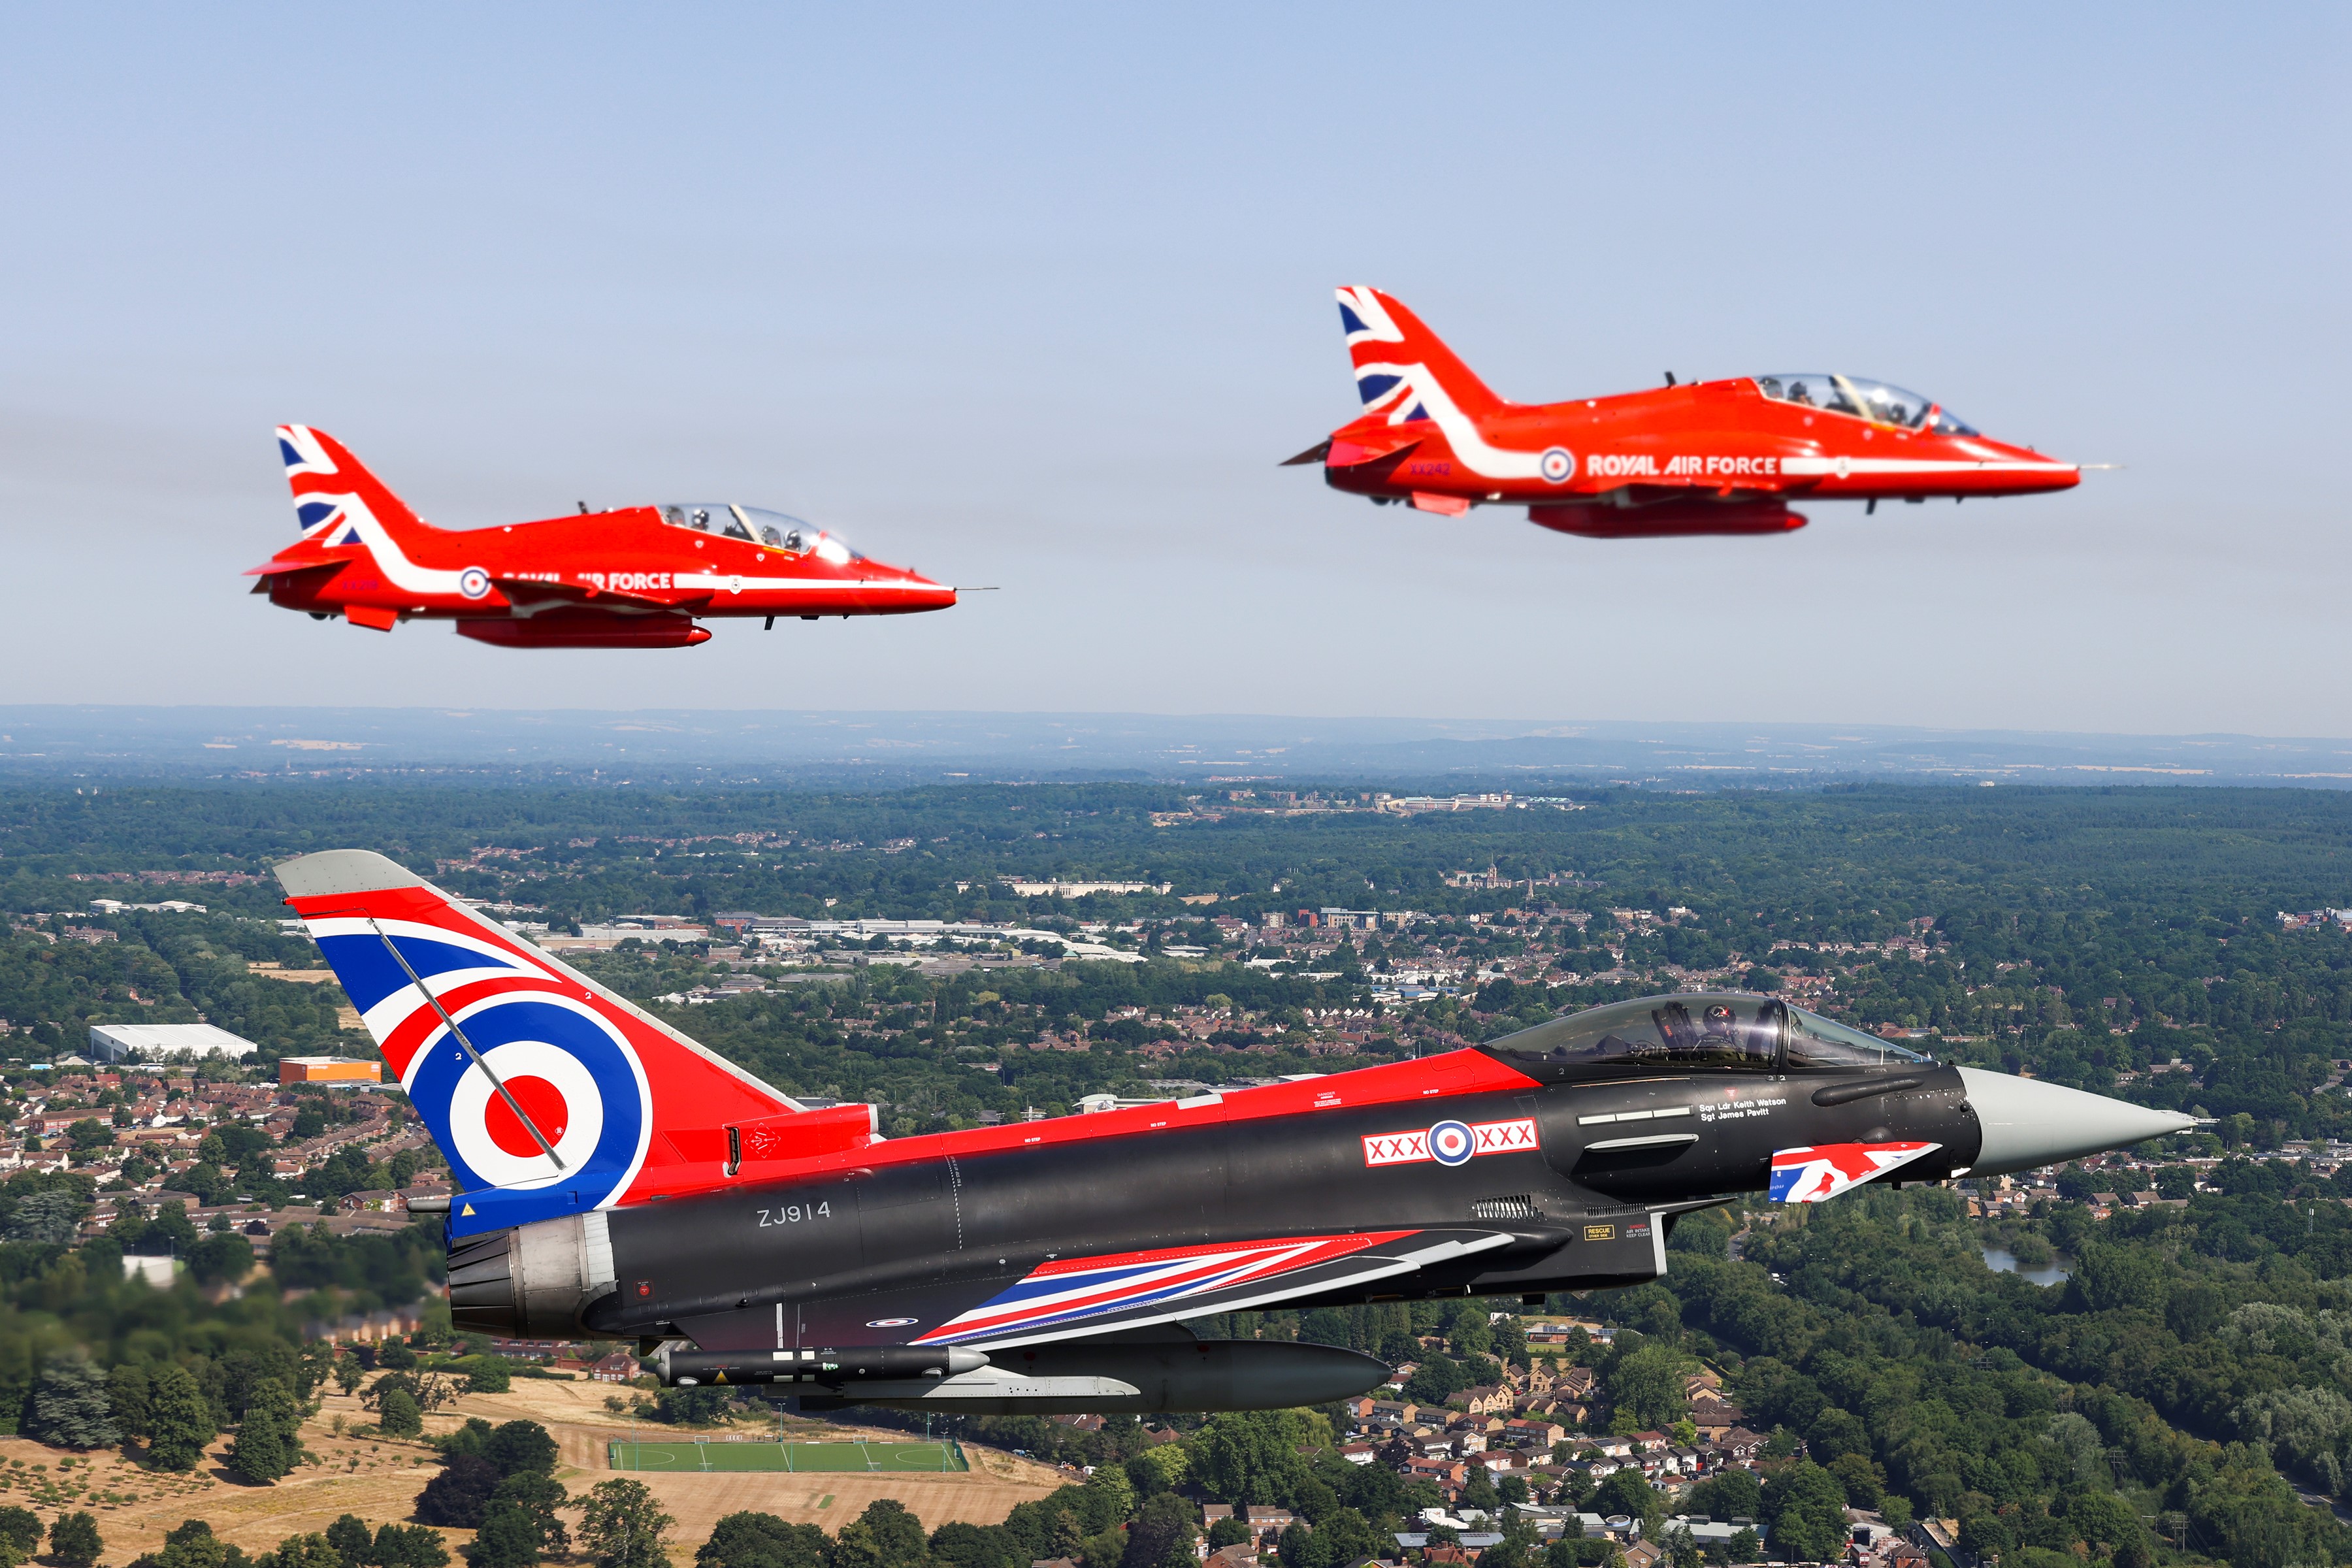 Image shows Red Arrows performing in formation over airfield.